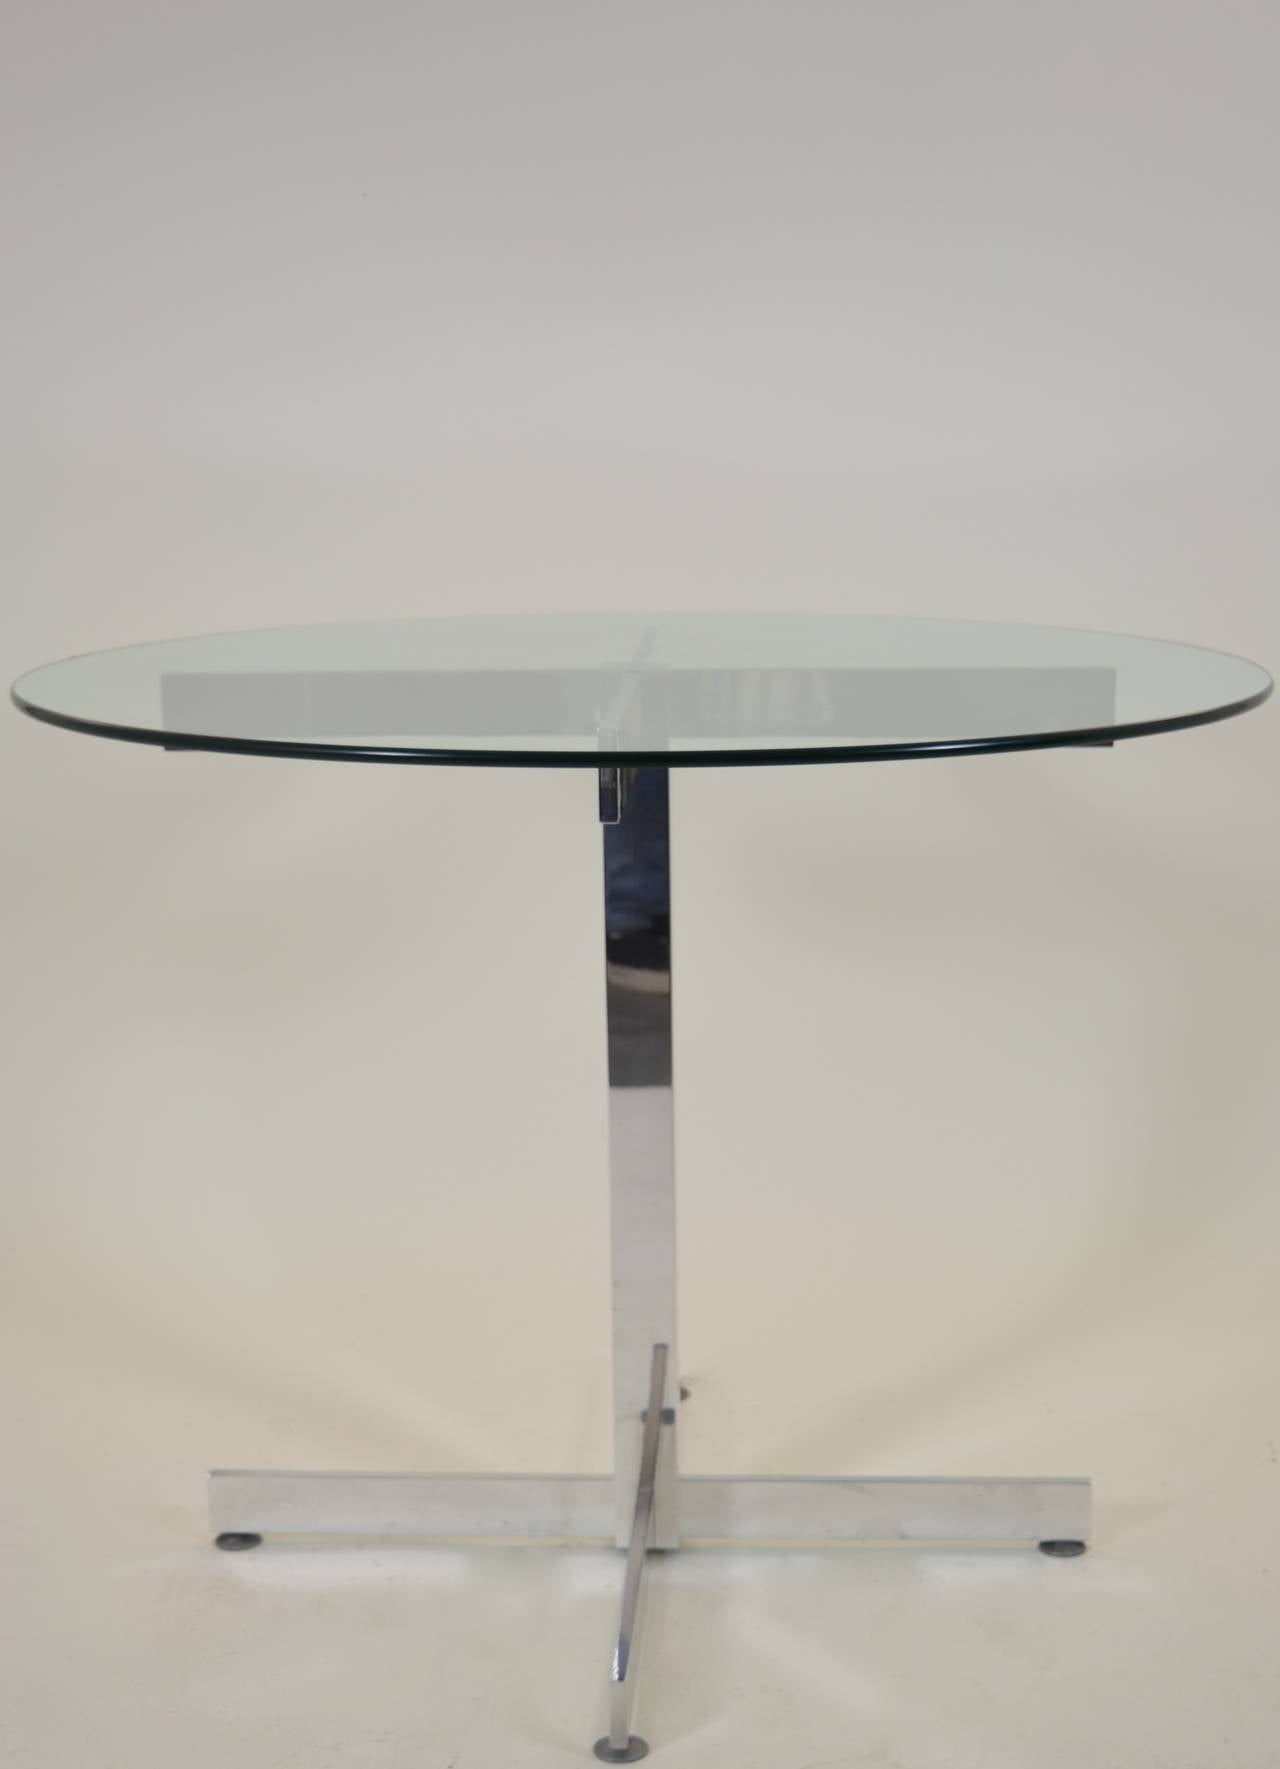 Perfect for a small dining or breakfast area; could even be a center or game table. Highly polished simple aluminum base with heavy glass top.